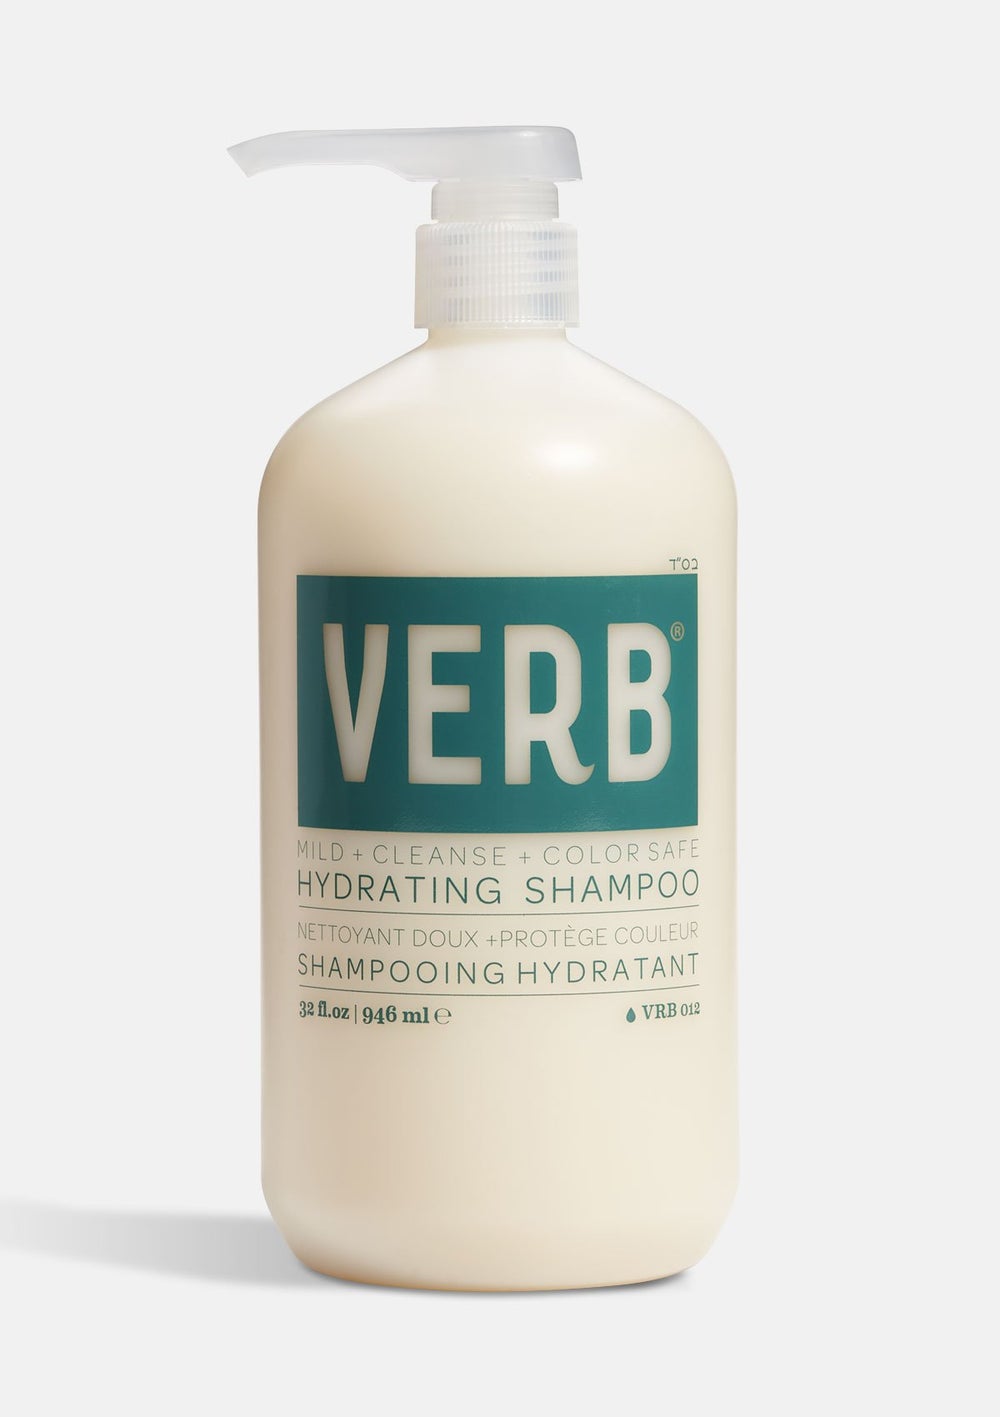 Verb - Hydrating Shampoo Mild + Color Safe + Cleanse |32 oz| - by Verb |ProCare Outlet|